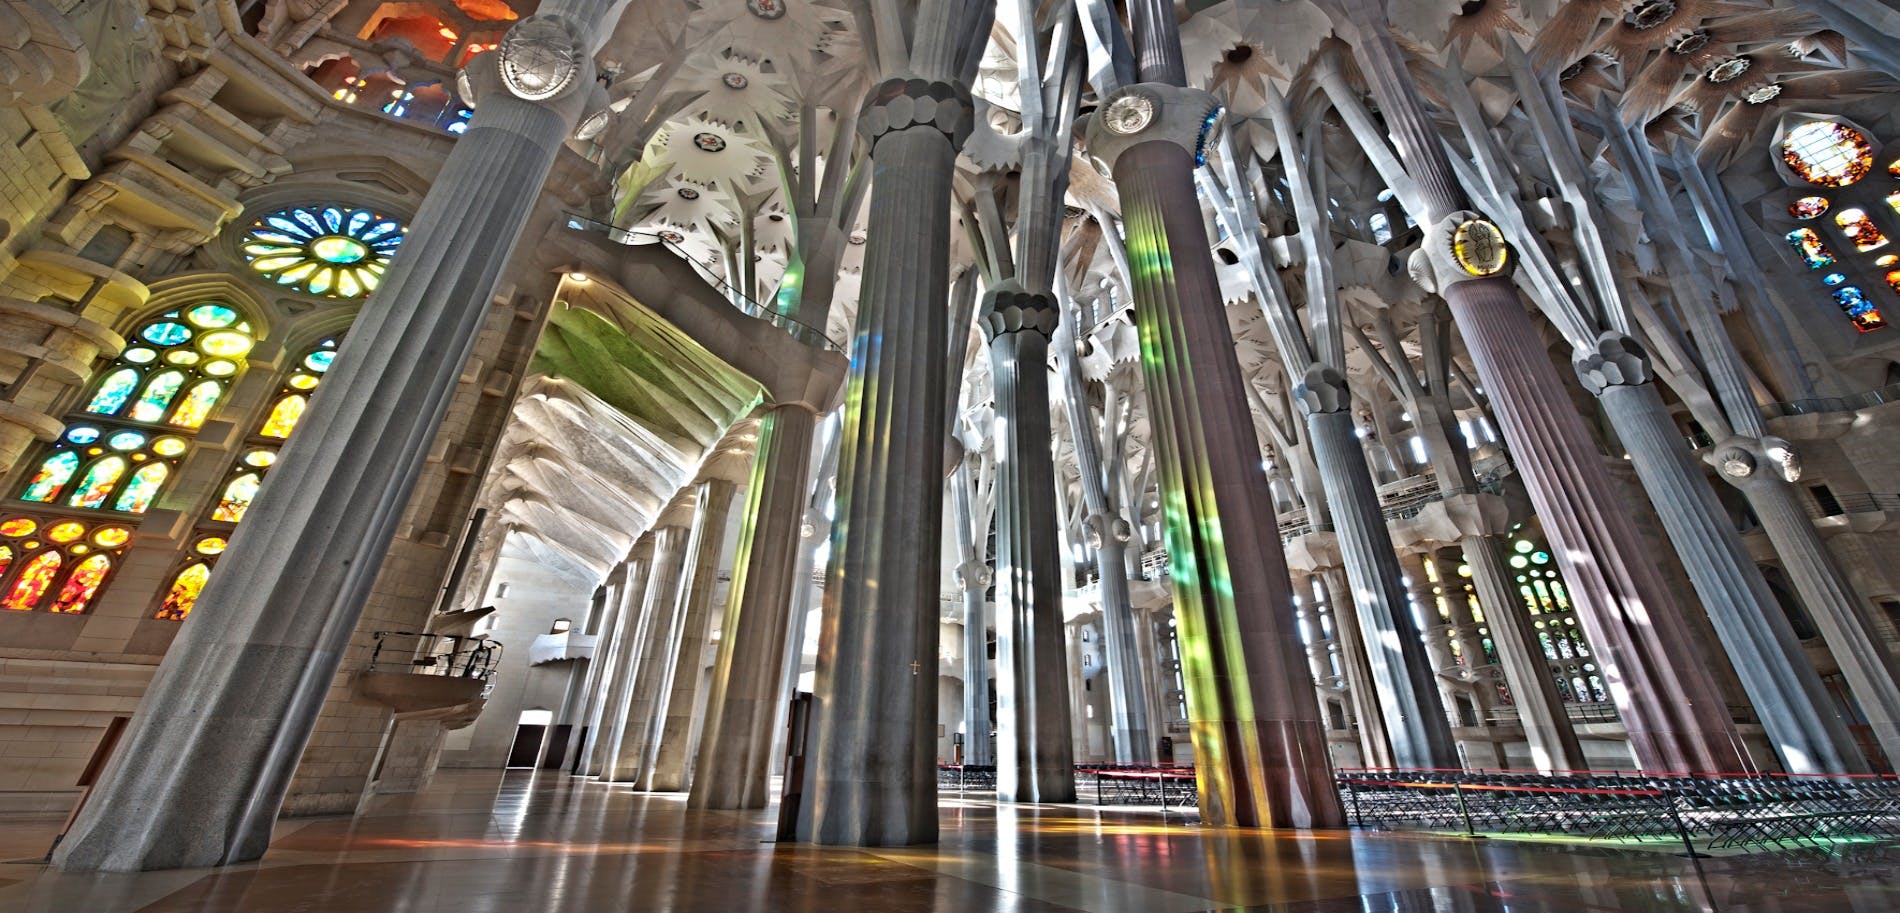 Park Guell and Sagrada Familia private tour with hotel pick-up